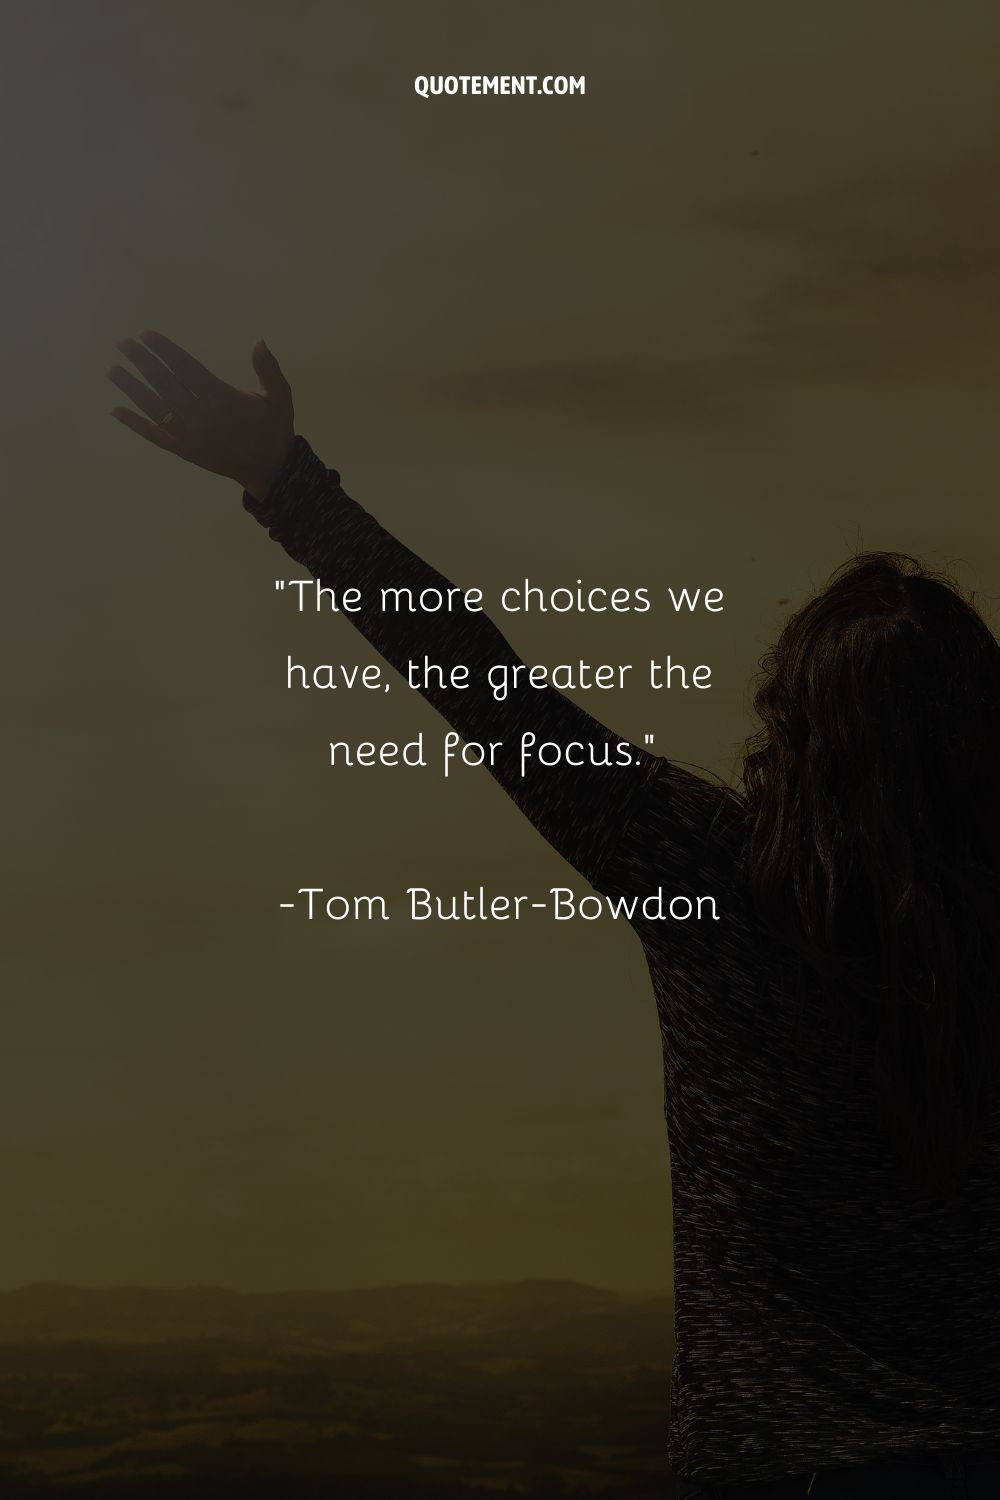 The more choices we have, the greater the need for focus